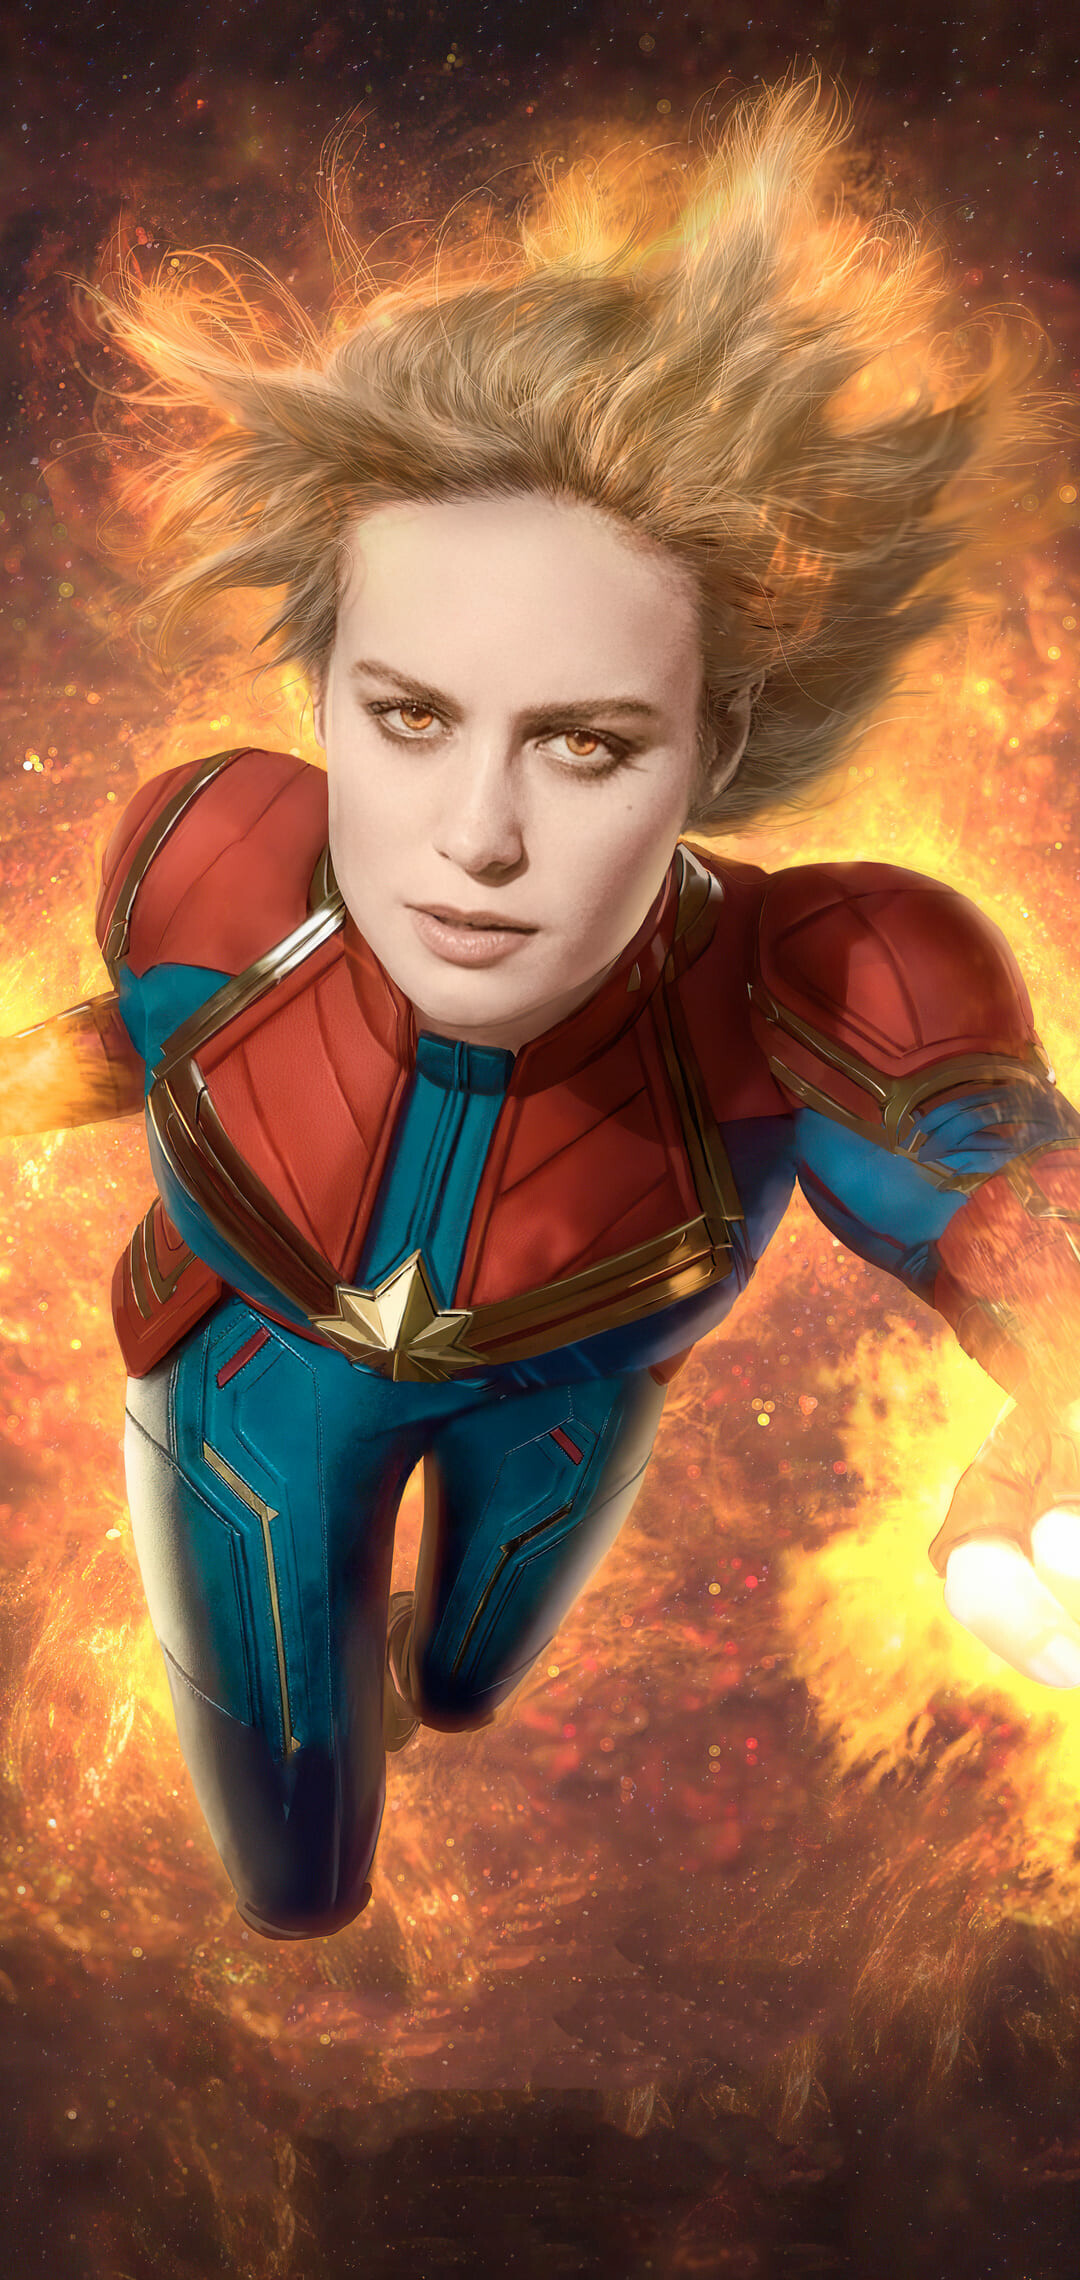 Marvel: Captain Marvel, Carol Danvers, a fictional character portrayed by Brie Larson. 1080x2280 HD Wallpaper.